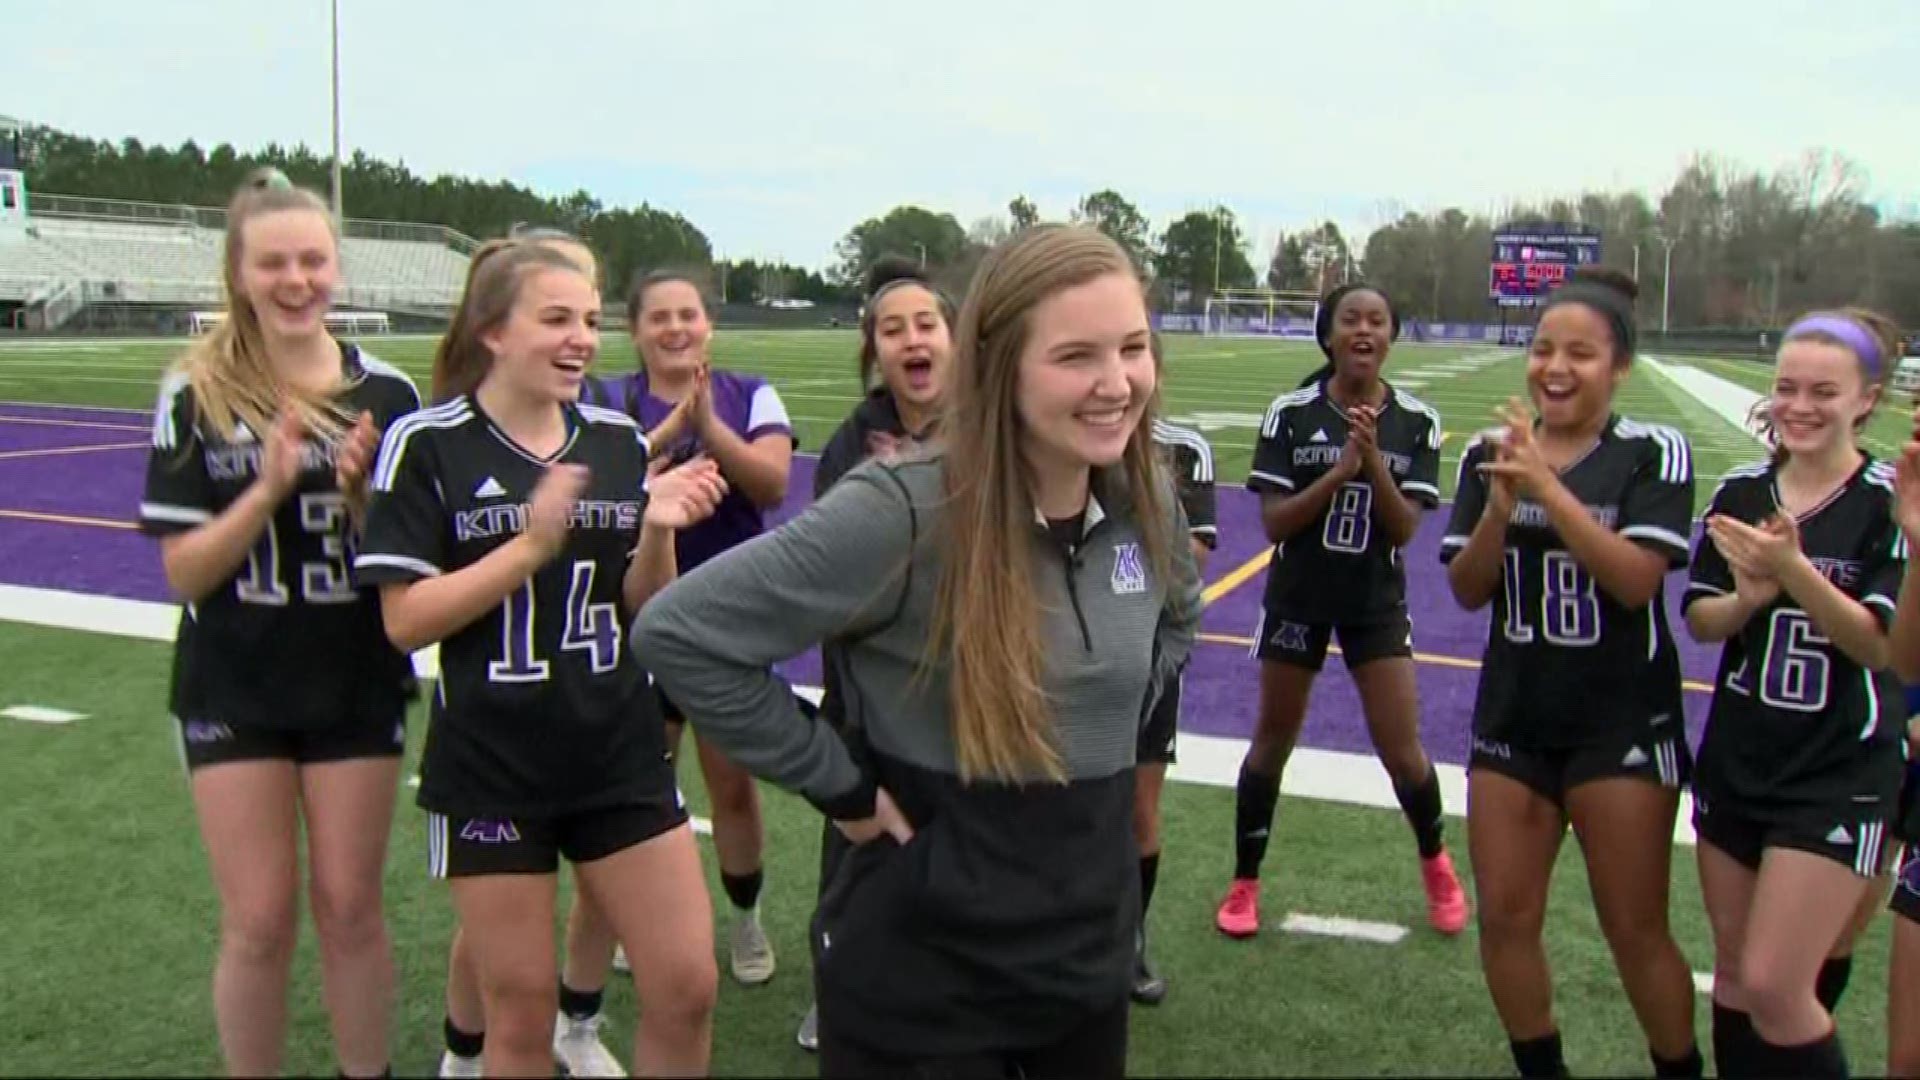 McDermott plays soccer for Ardrey Kell High School and she is excelling on and off the field.